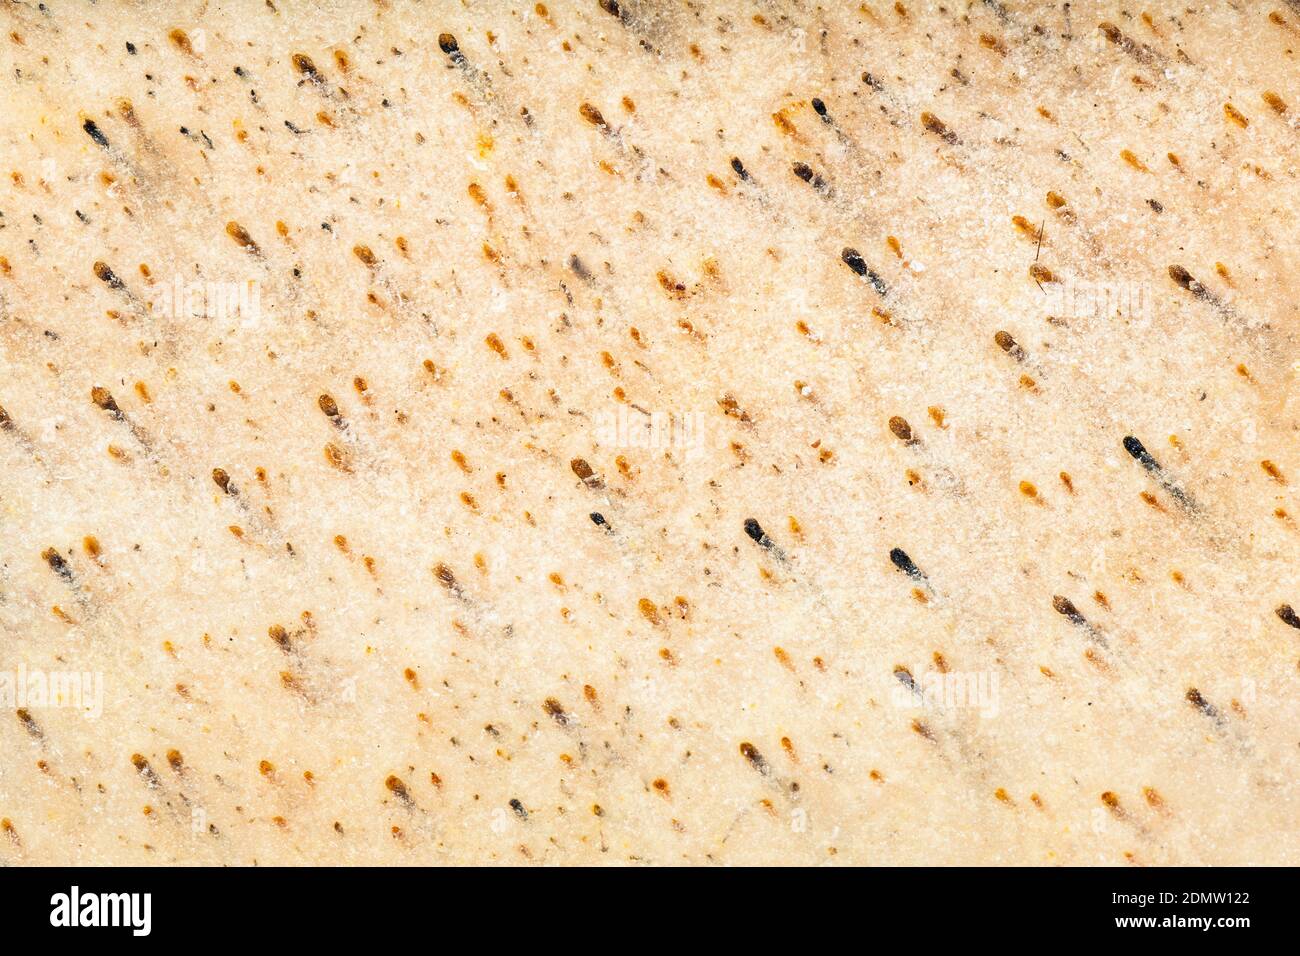 food texture - shaved salted pork skin close up Stock Photo